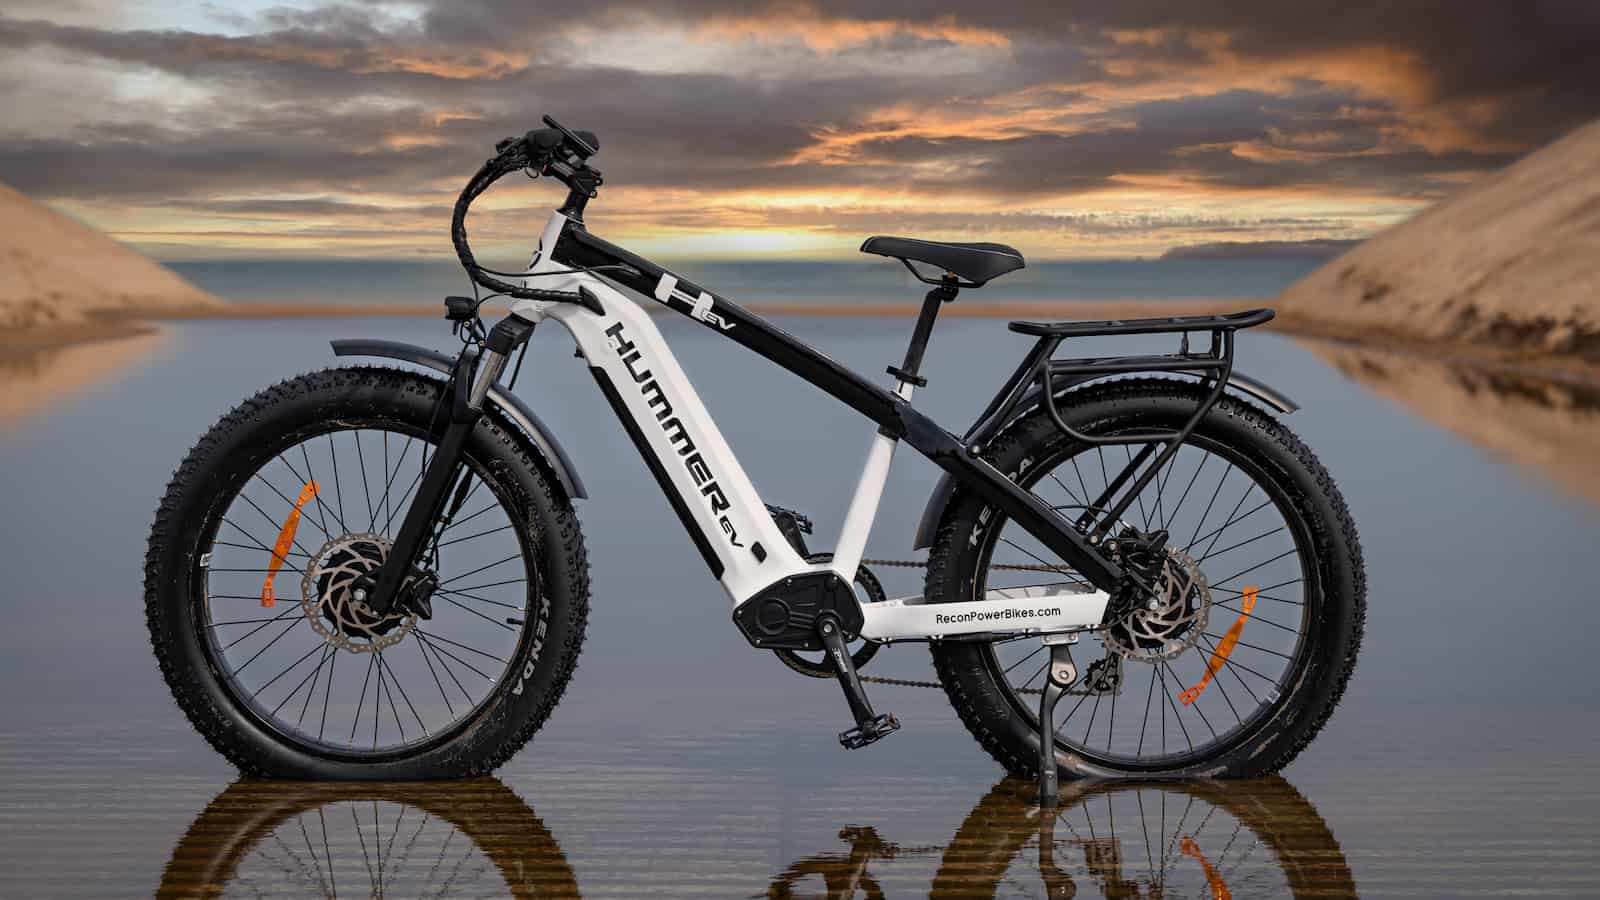 GMC Unveils The Hummer EV All-Wheel-Drive Electric Bicycle This outlandish fat-tire e-bike packs dual Bafang motors and pumps out 2,400 watts of power.